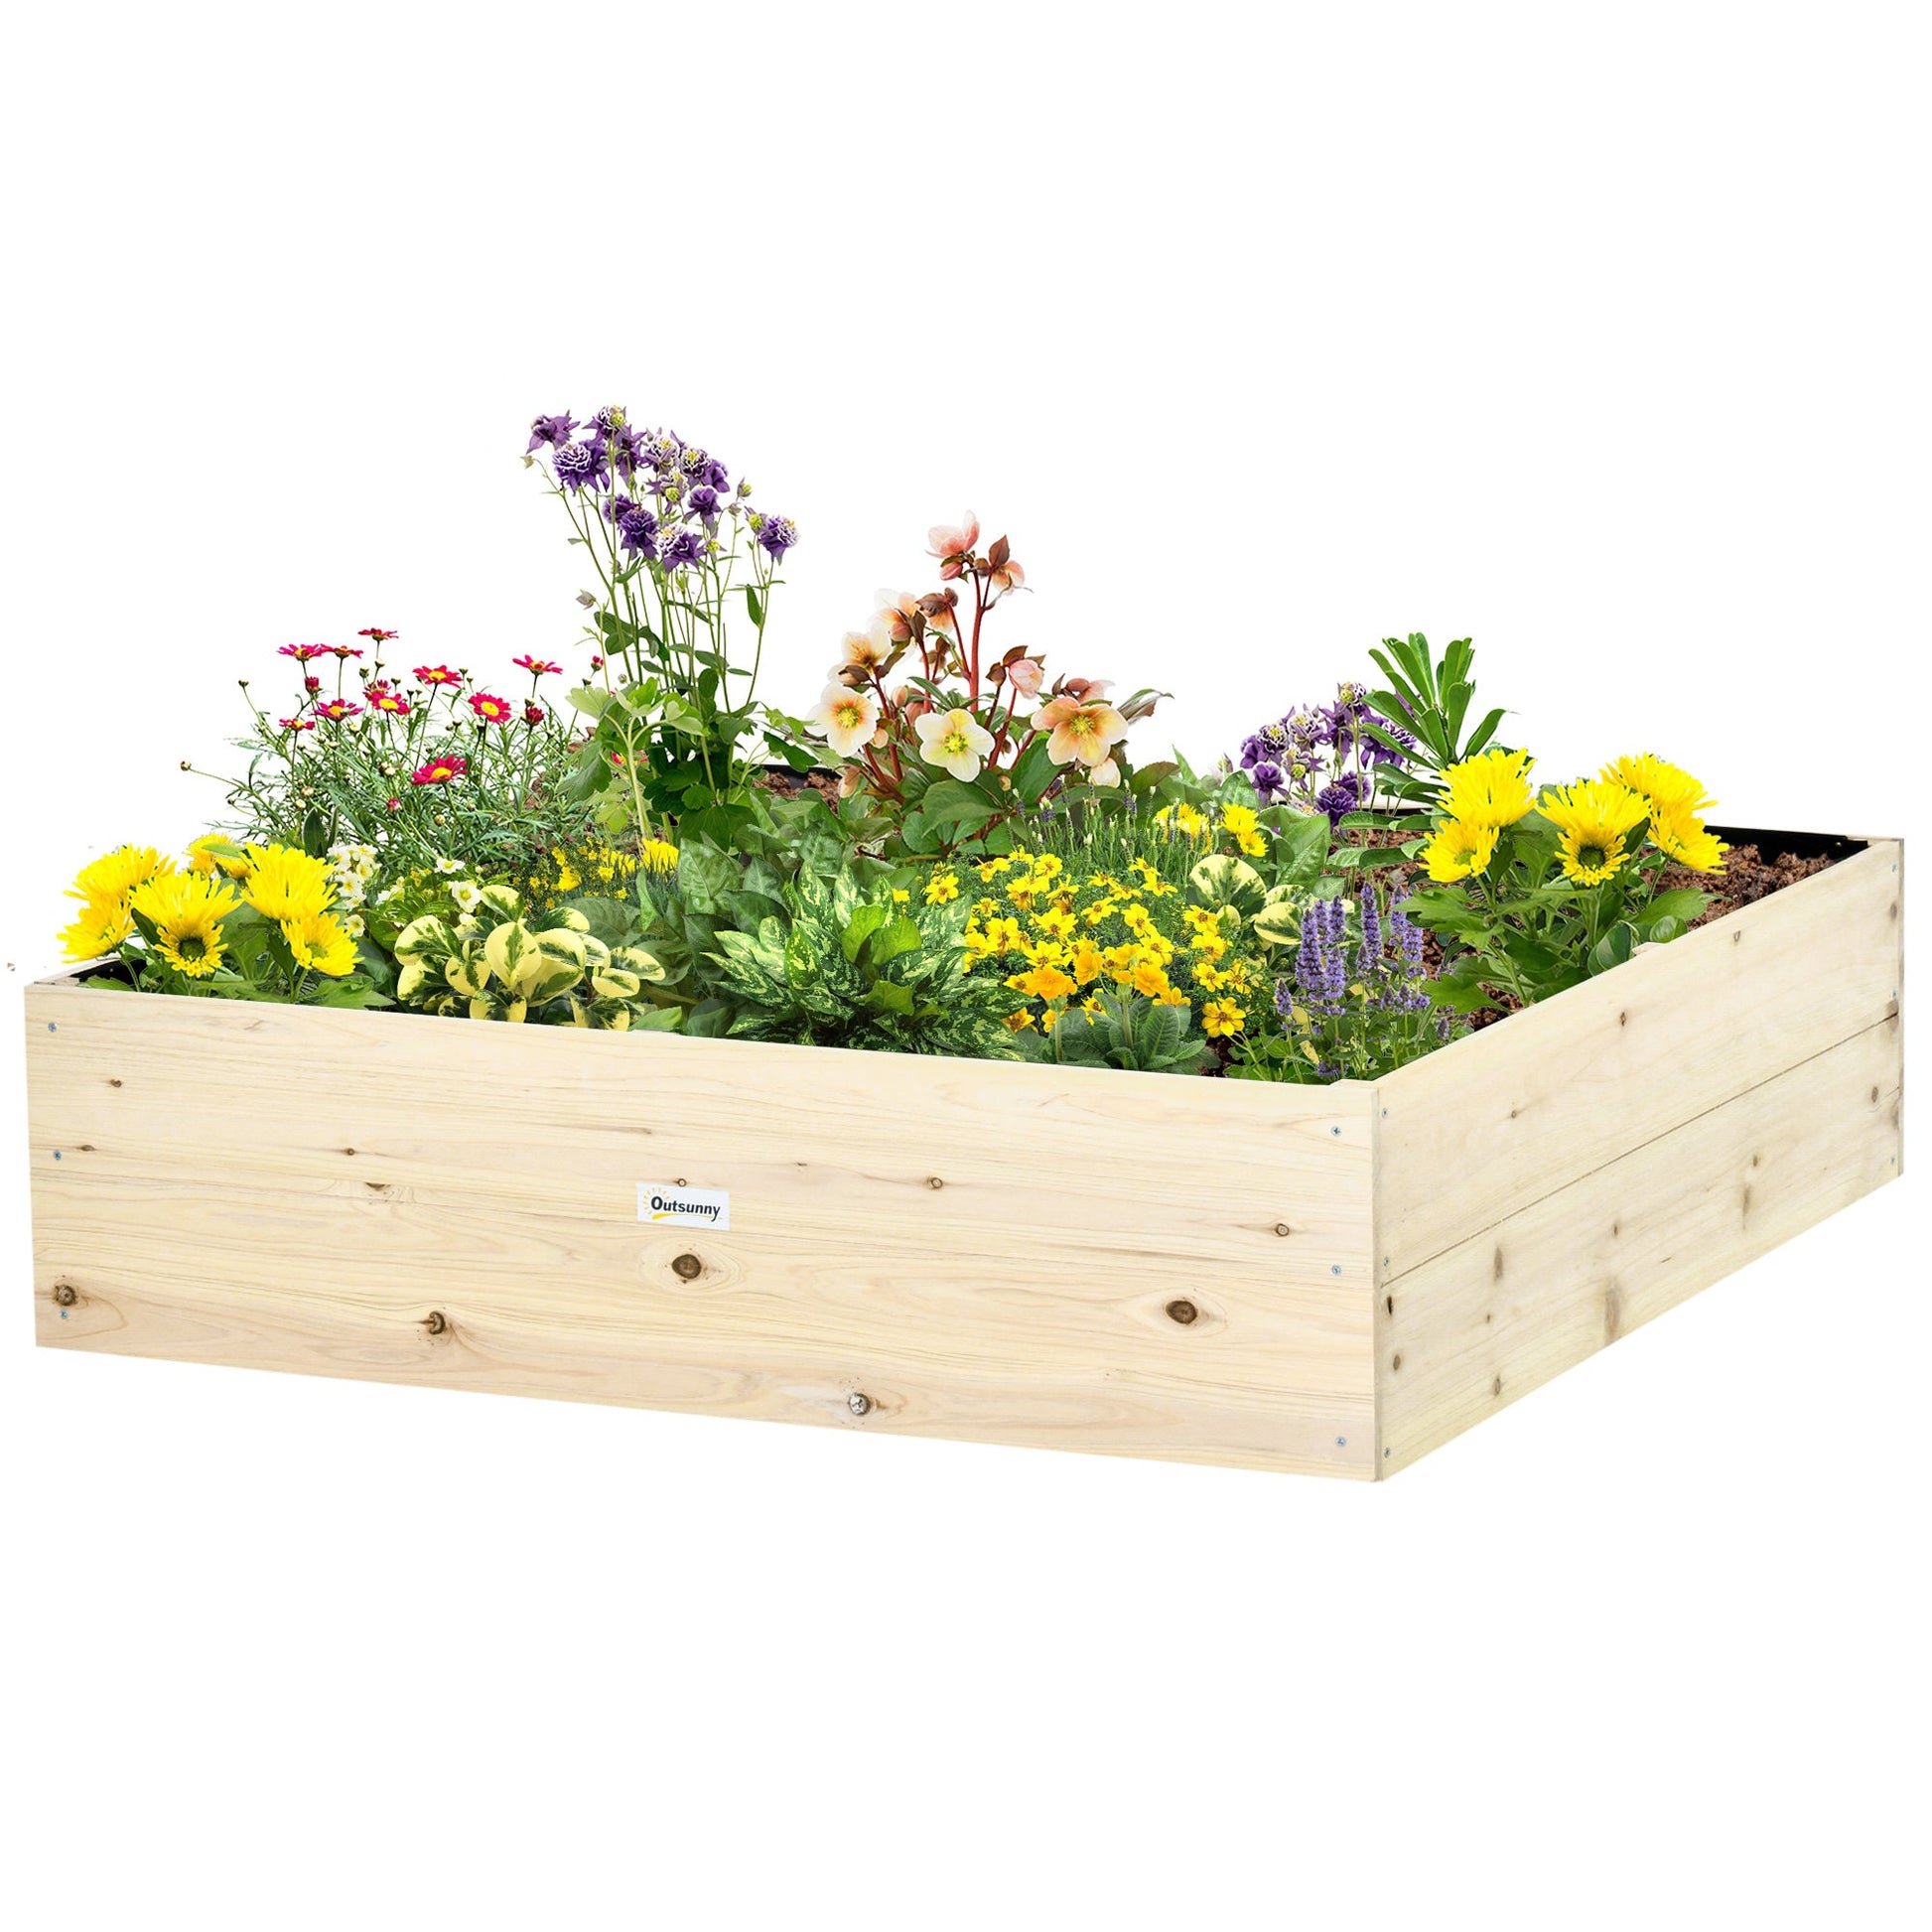 46'' x 46'' Raised Garden Bed Elevated Wooden Planter Box Outdoor for Backyard, Patio to Grow Vegetables, Herbs, and Flowers at Gallery Canada